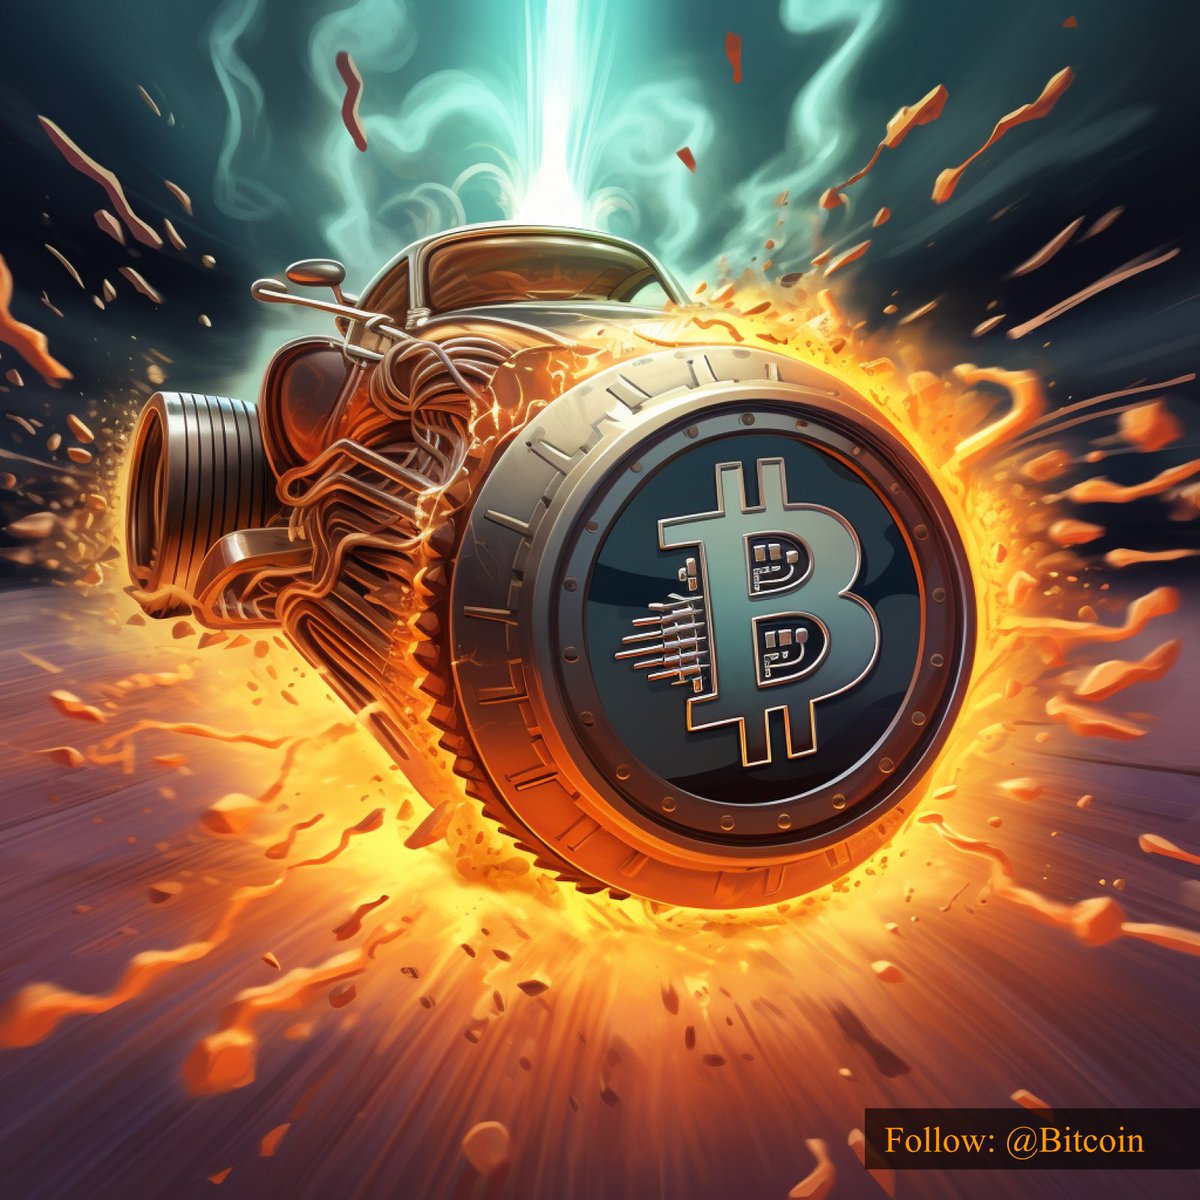 #Bitcoin is Supercharged and Blazing Through the Crypto Space at Hyperspeed Toward Unprecedented Heights. #BitcoinSupercharged